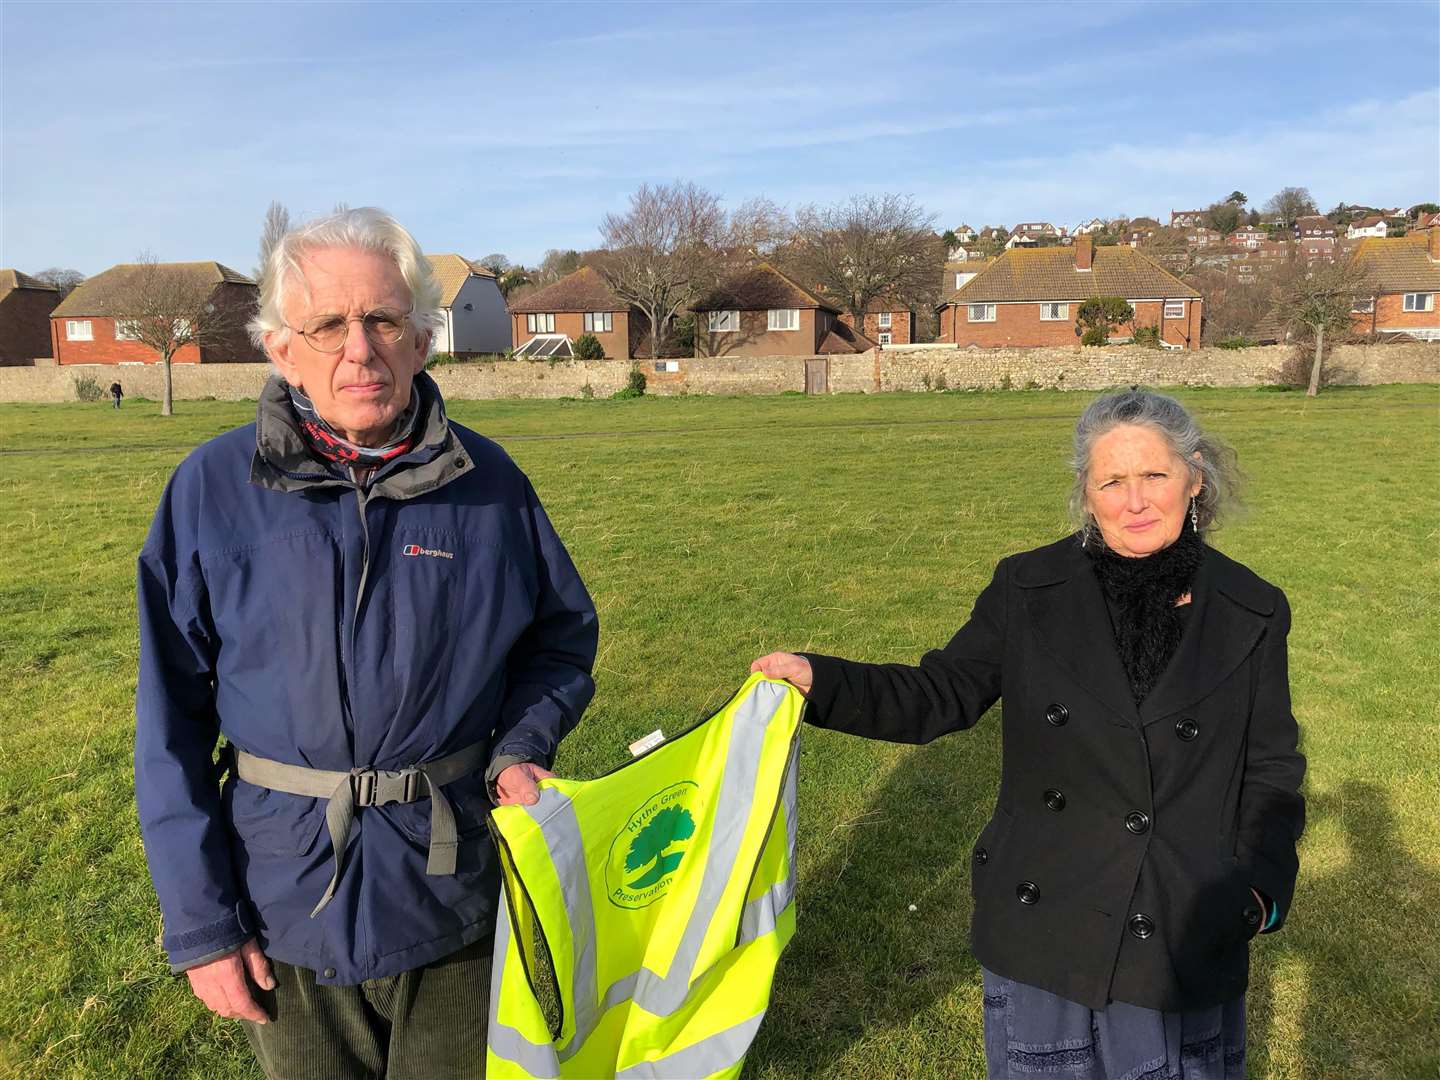 The pair believe the noise and traffic would be a major problem for residents living near Hythe Green